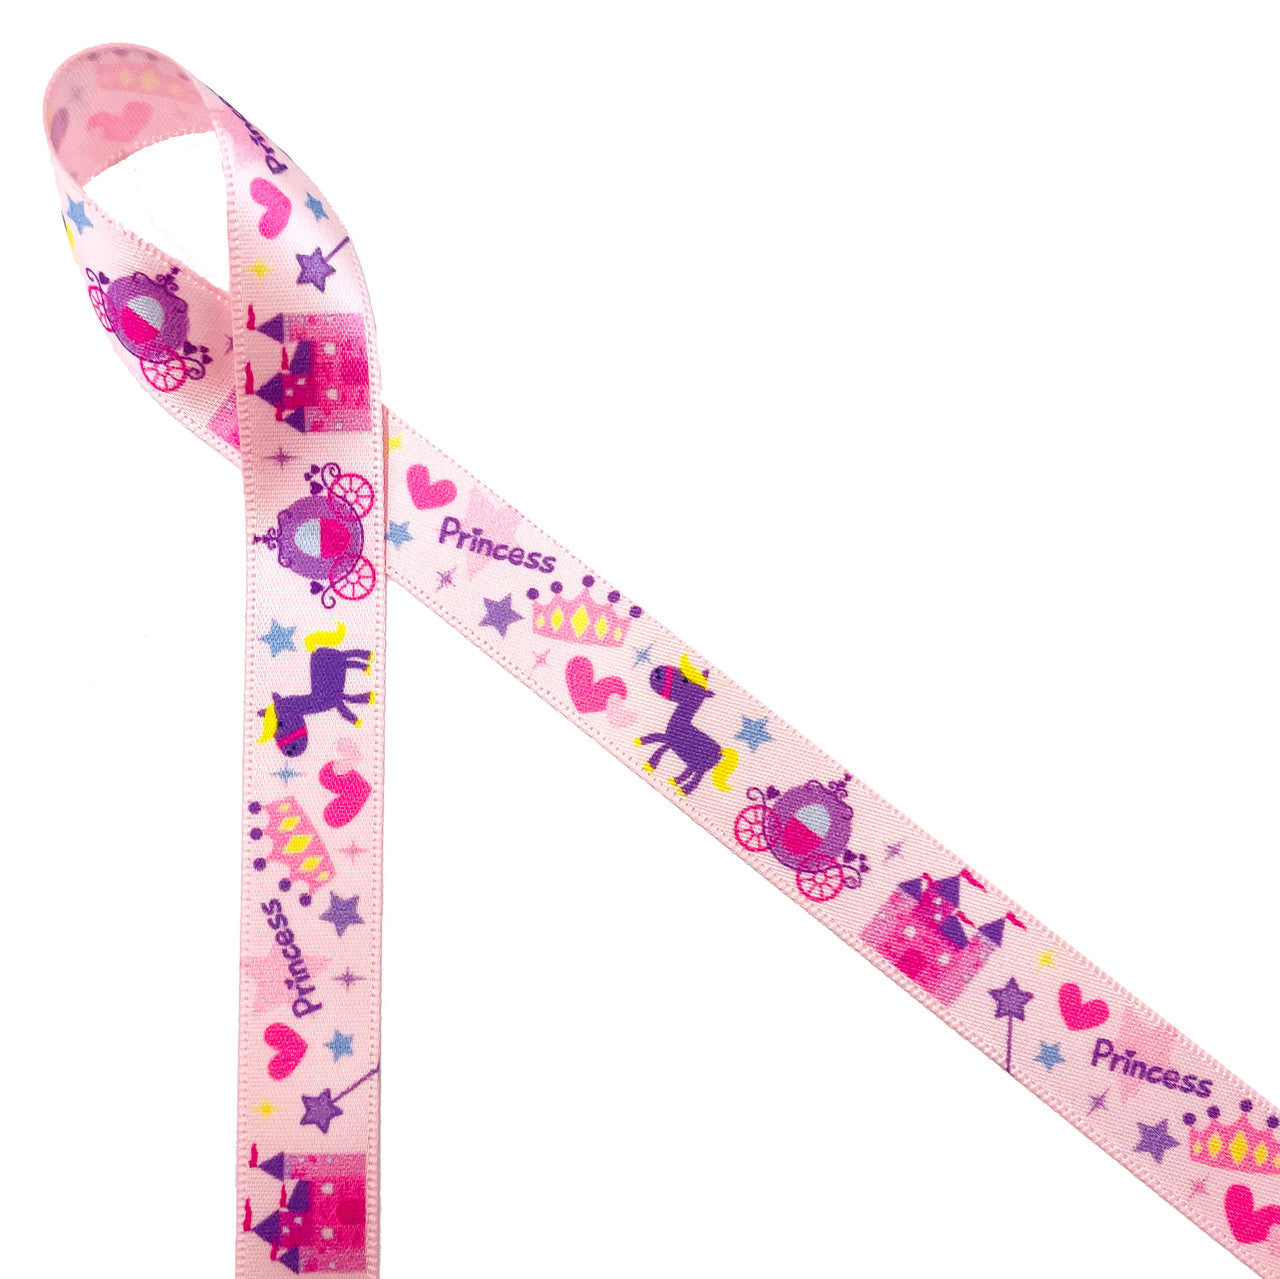 Princess in Pink on 5/8" single face satin ribbon featuring all the important elements a regal little one could ever want!